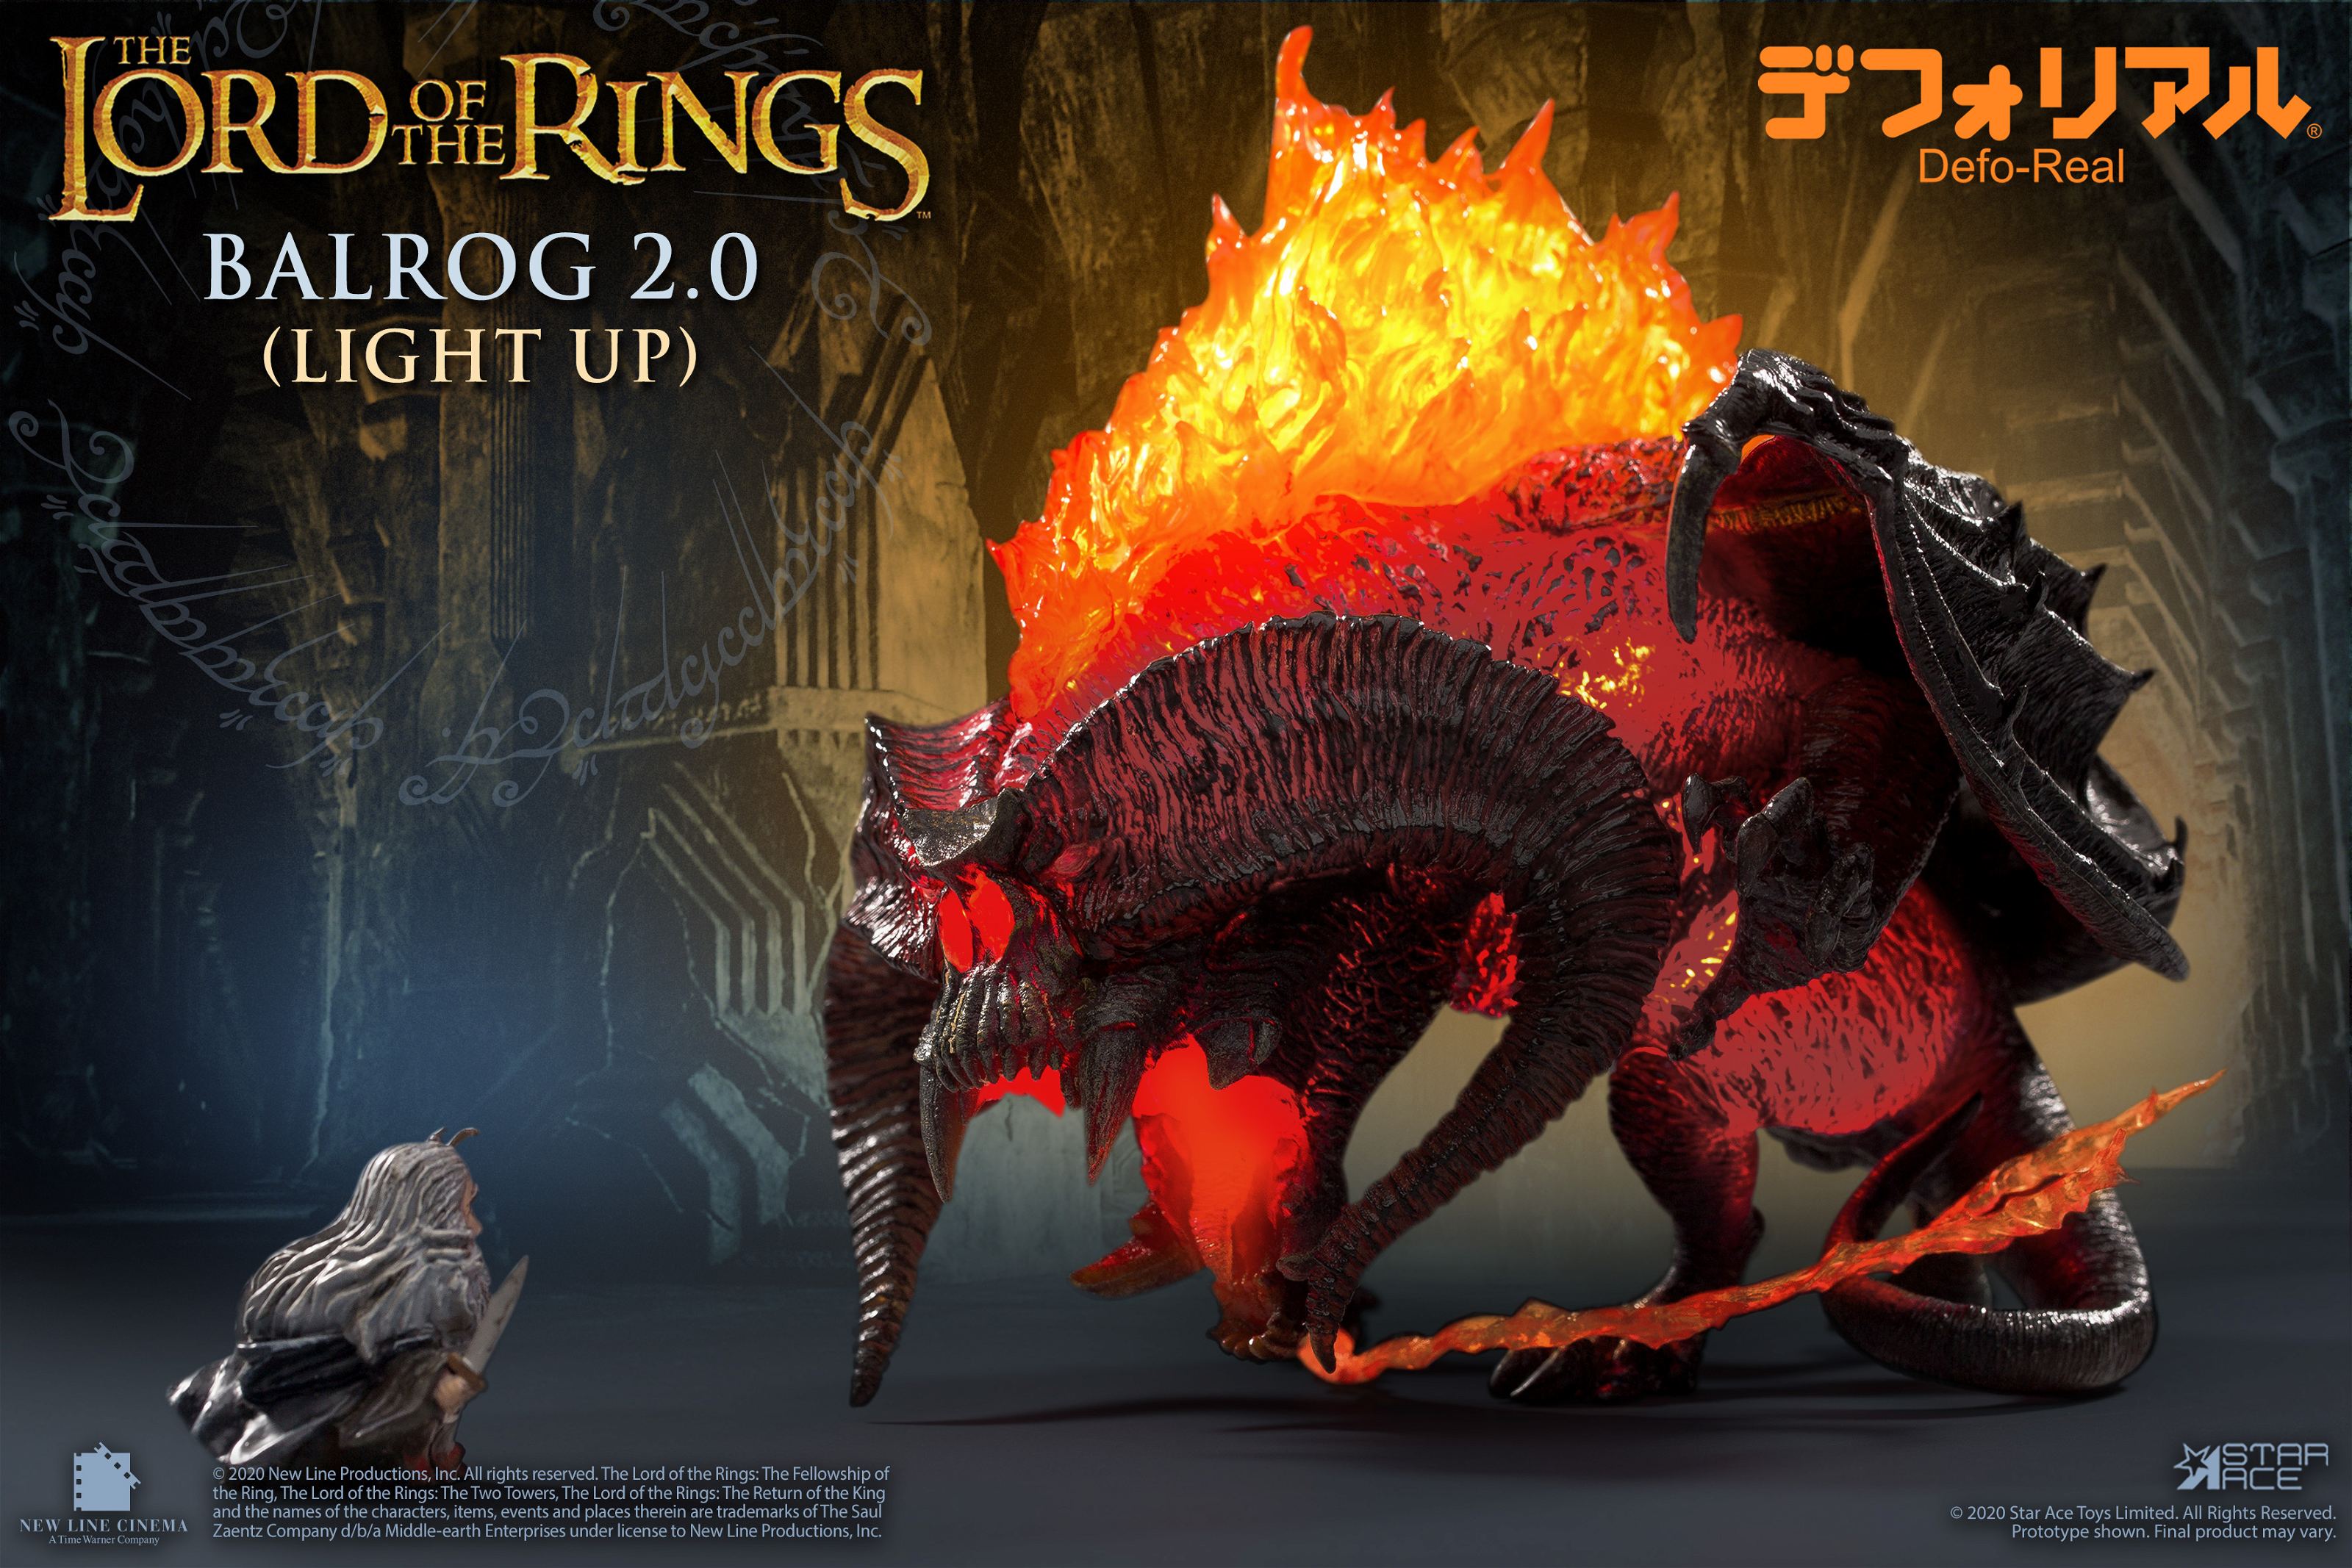 DEFOREAL THE LORD OF THE RINGS: BALROG 2.0 LIGHT UP VER. Star Ace Toys